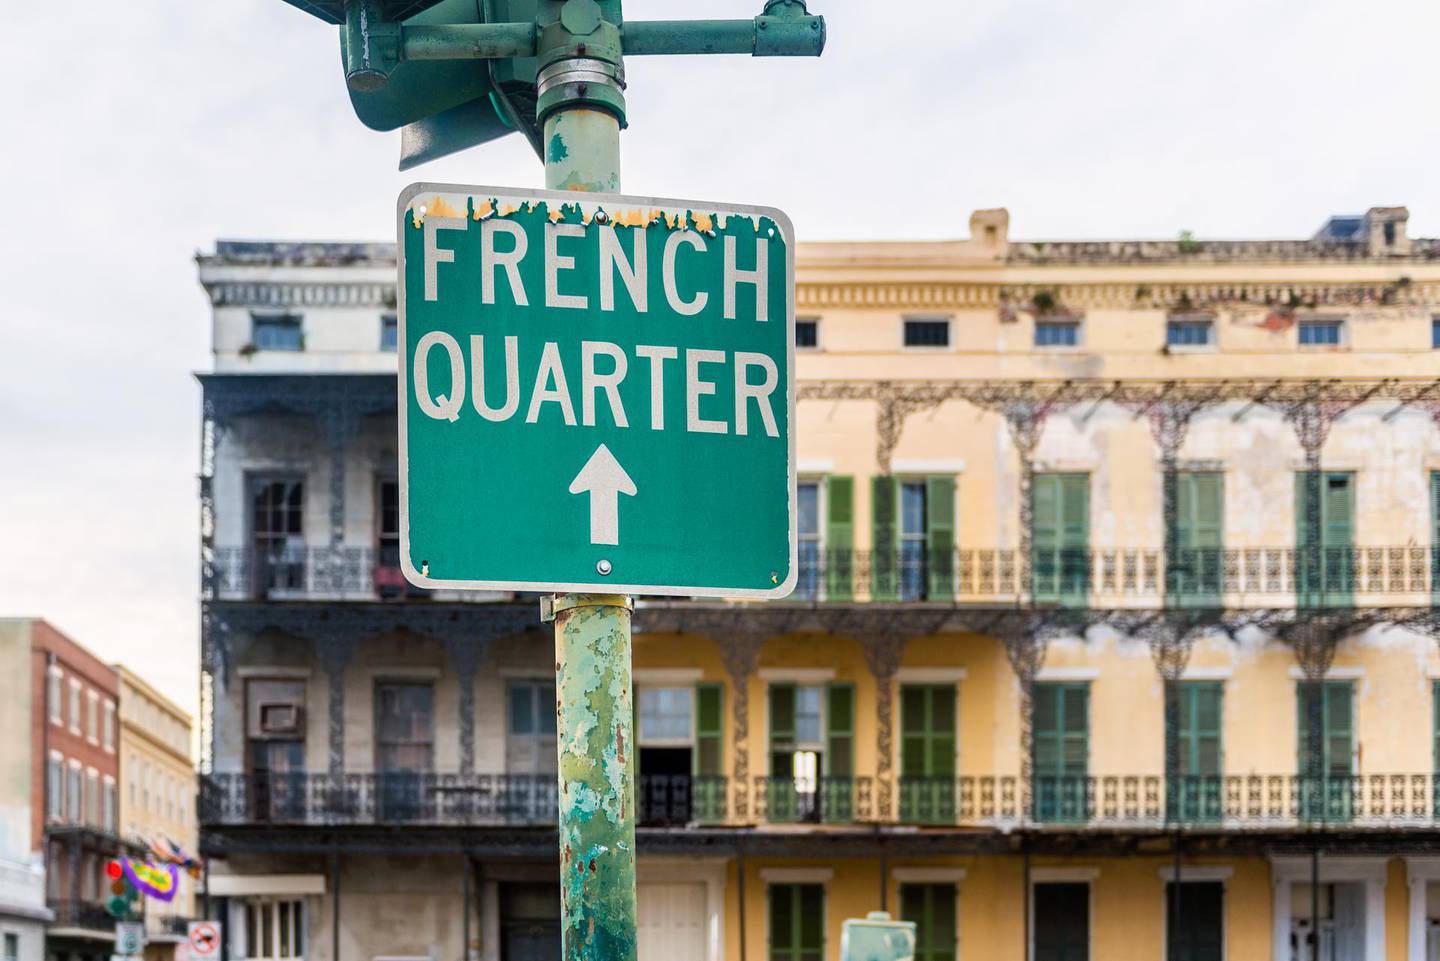 Directional Sign to French Quarter in New Orleans, Louisiana, United States. Getty Images